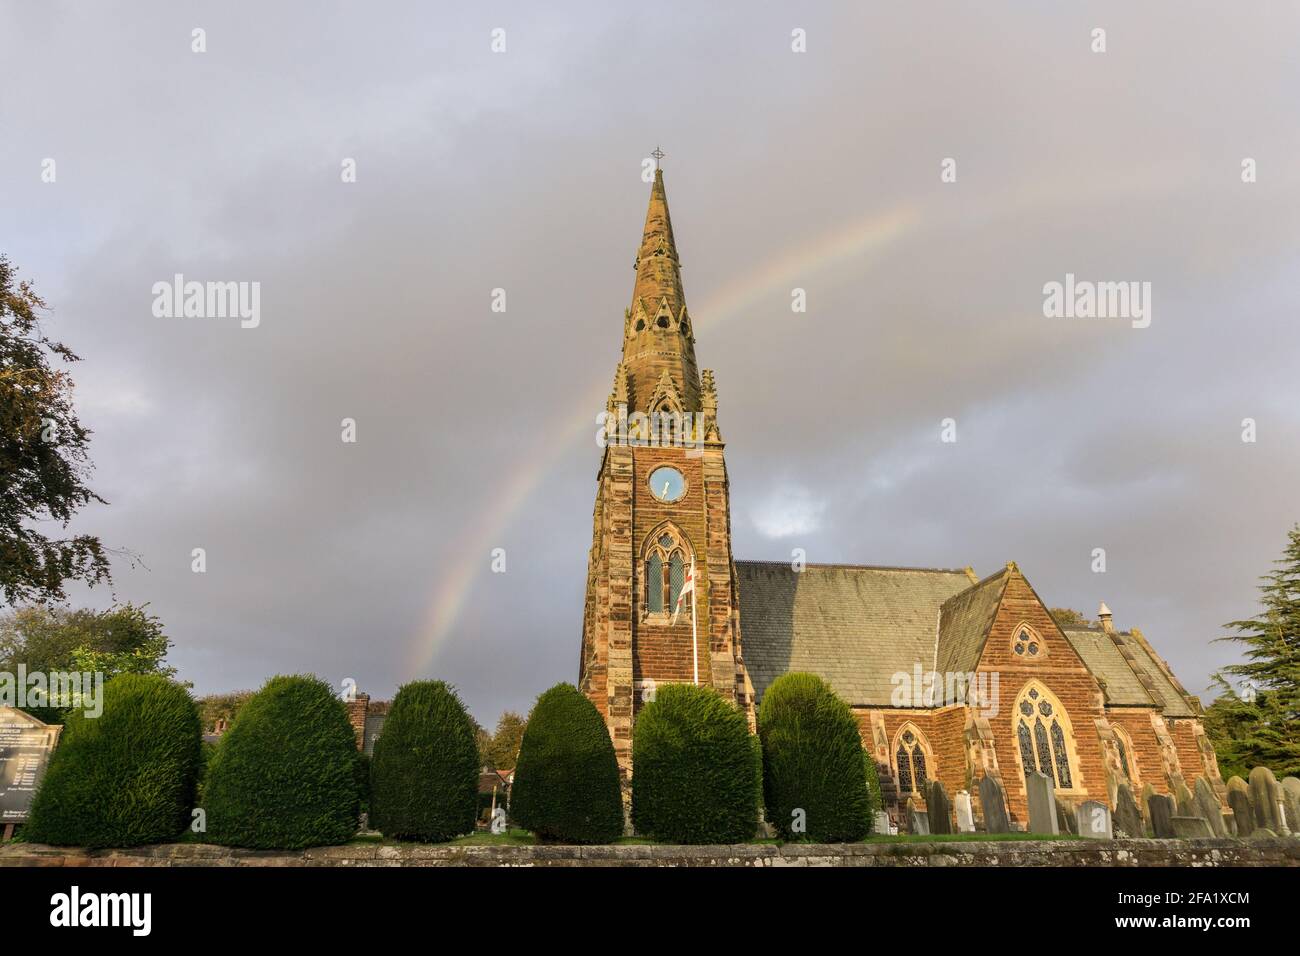 The parish church of All Saints in the village of Thornton Hough, Wirral, UK; dates from 1868 and paid for by Joseph Hirst a woollen mill owner. Stock Photo